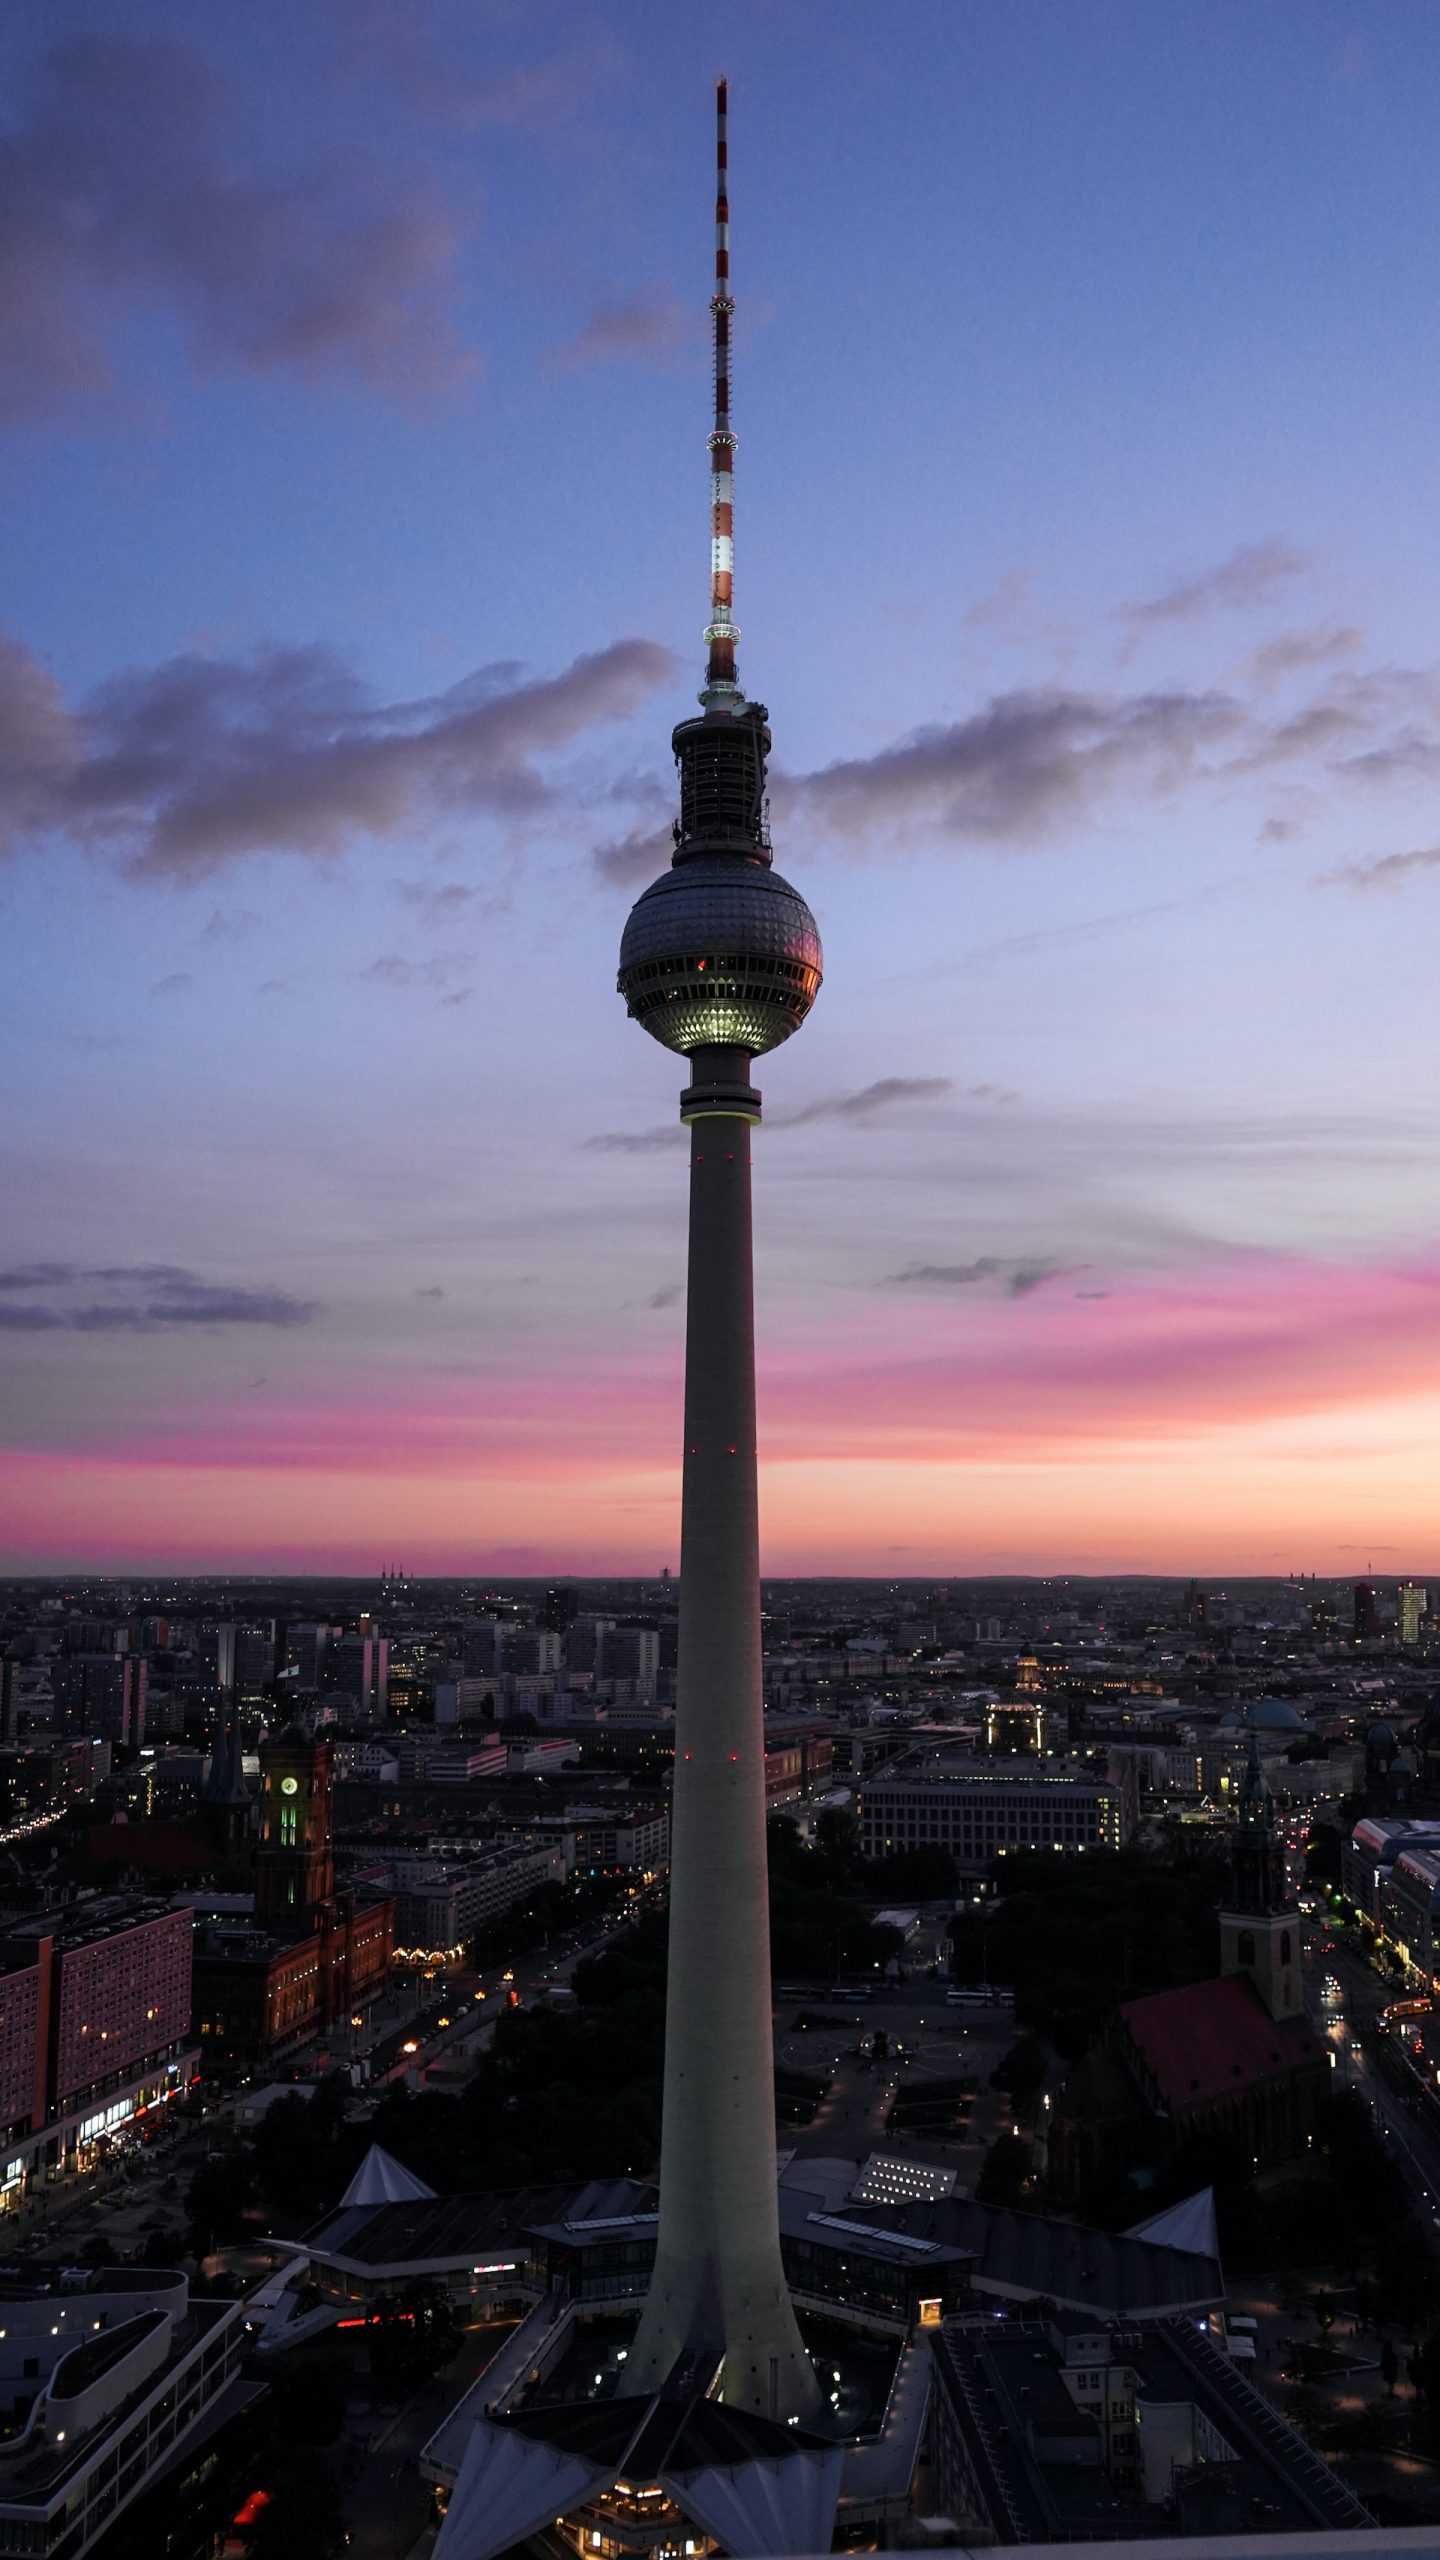 TV Tower in Berlin at sunset from a distance